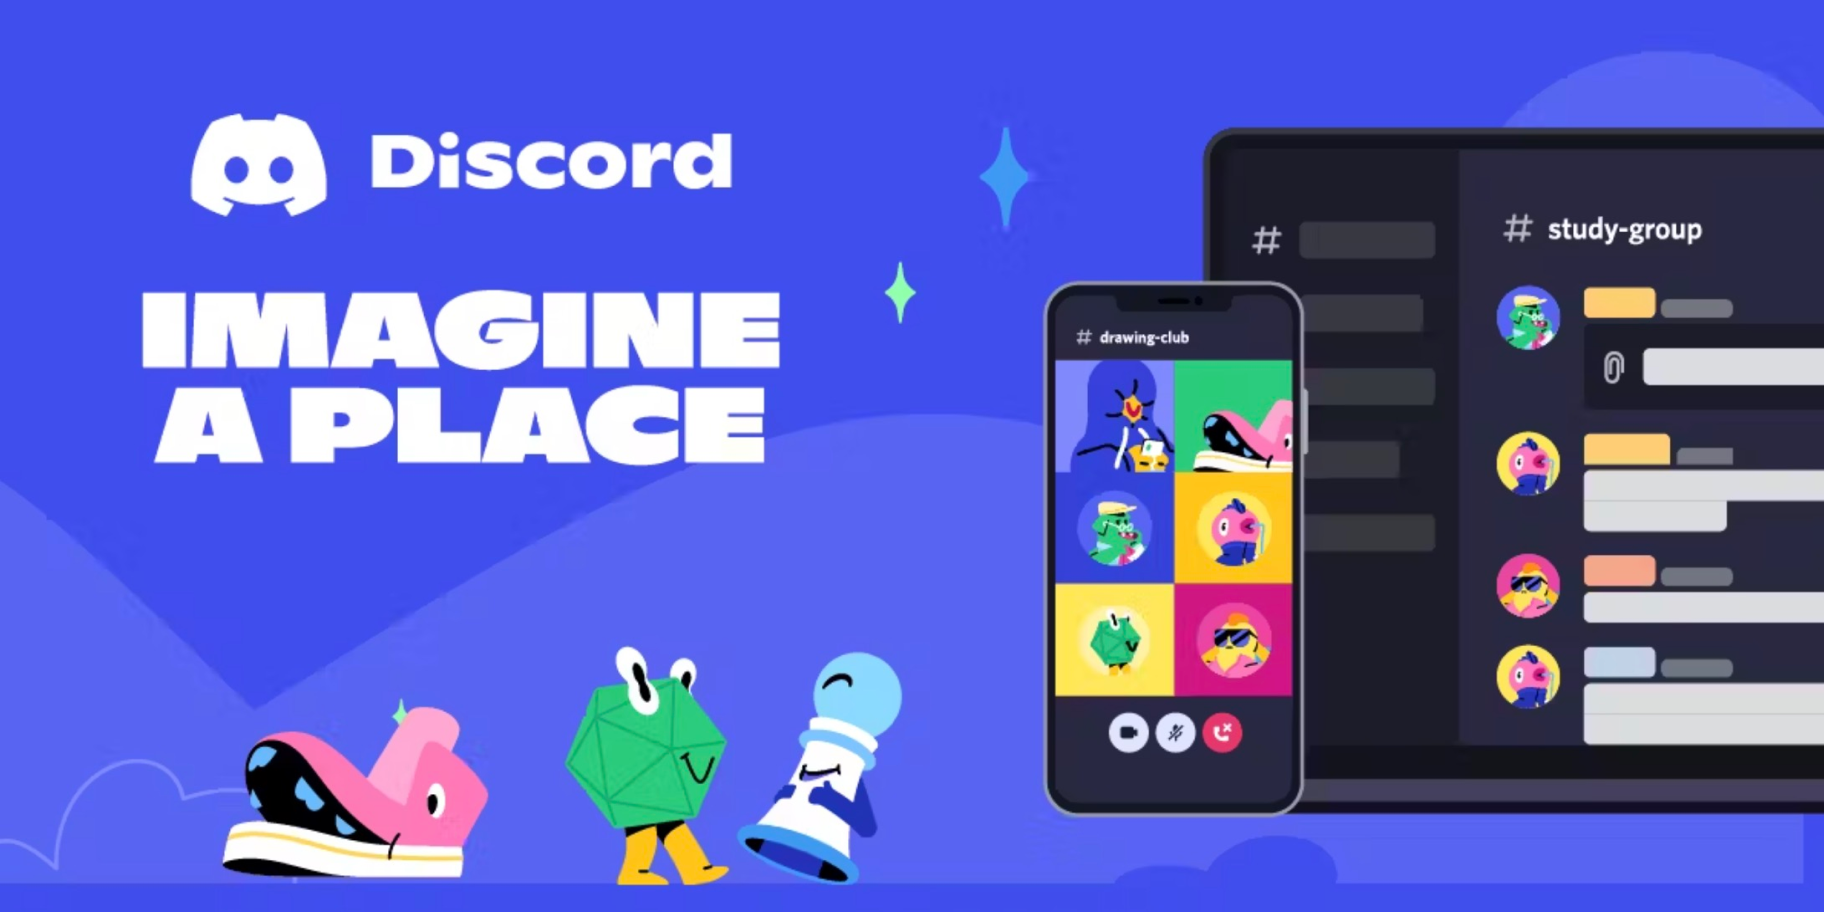 Meet the Discord Users Who Imagined a Place